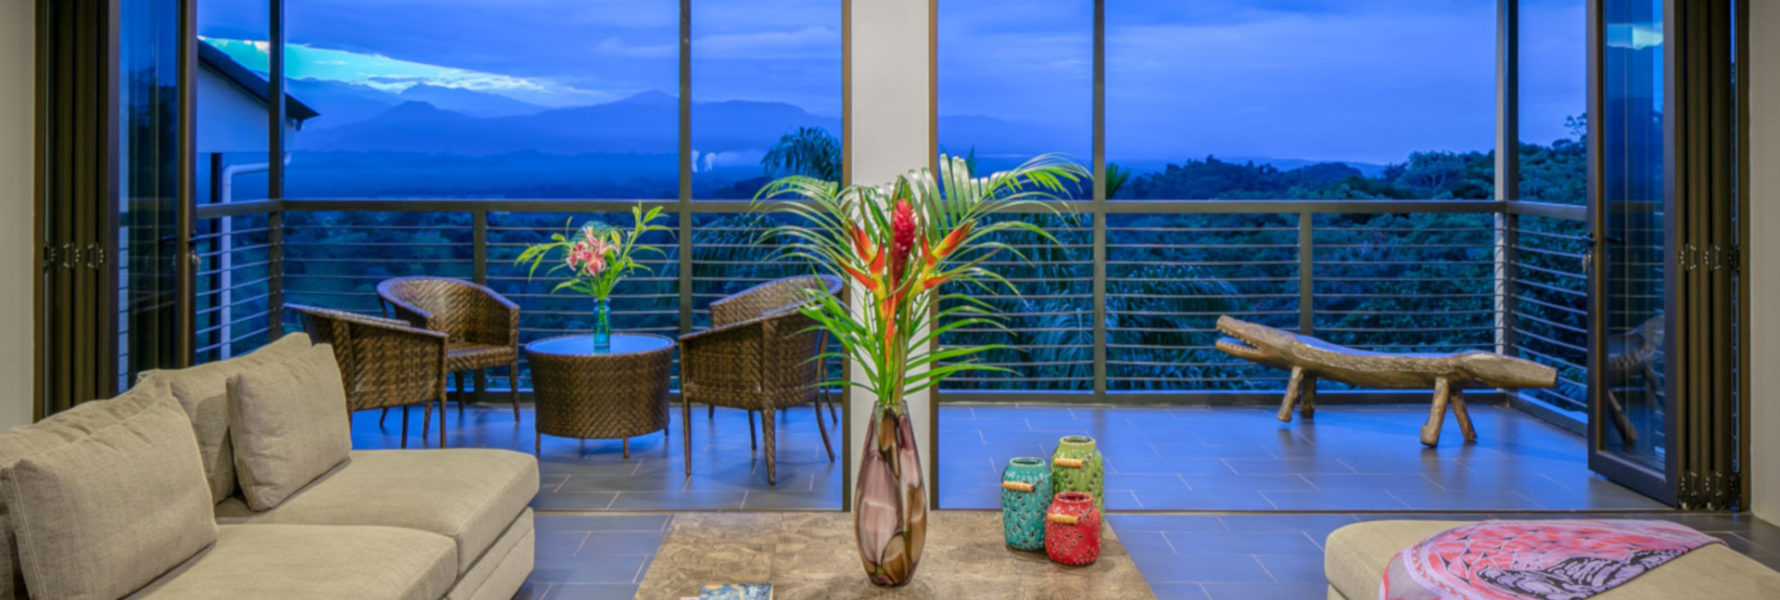 View the high mountain peaks at dusk from the comfort of this stunning lounge area.